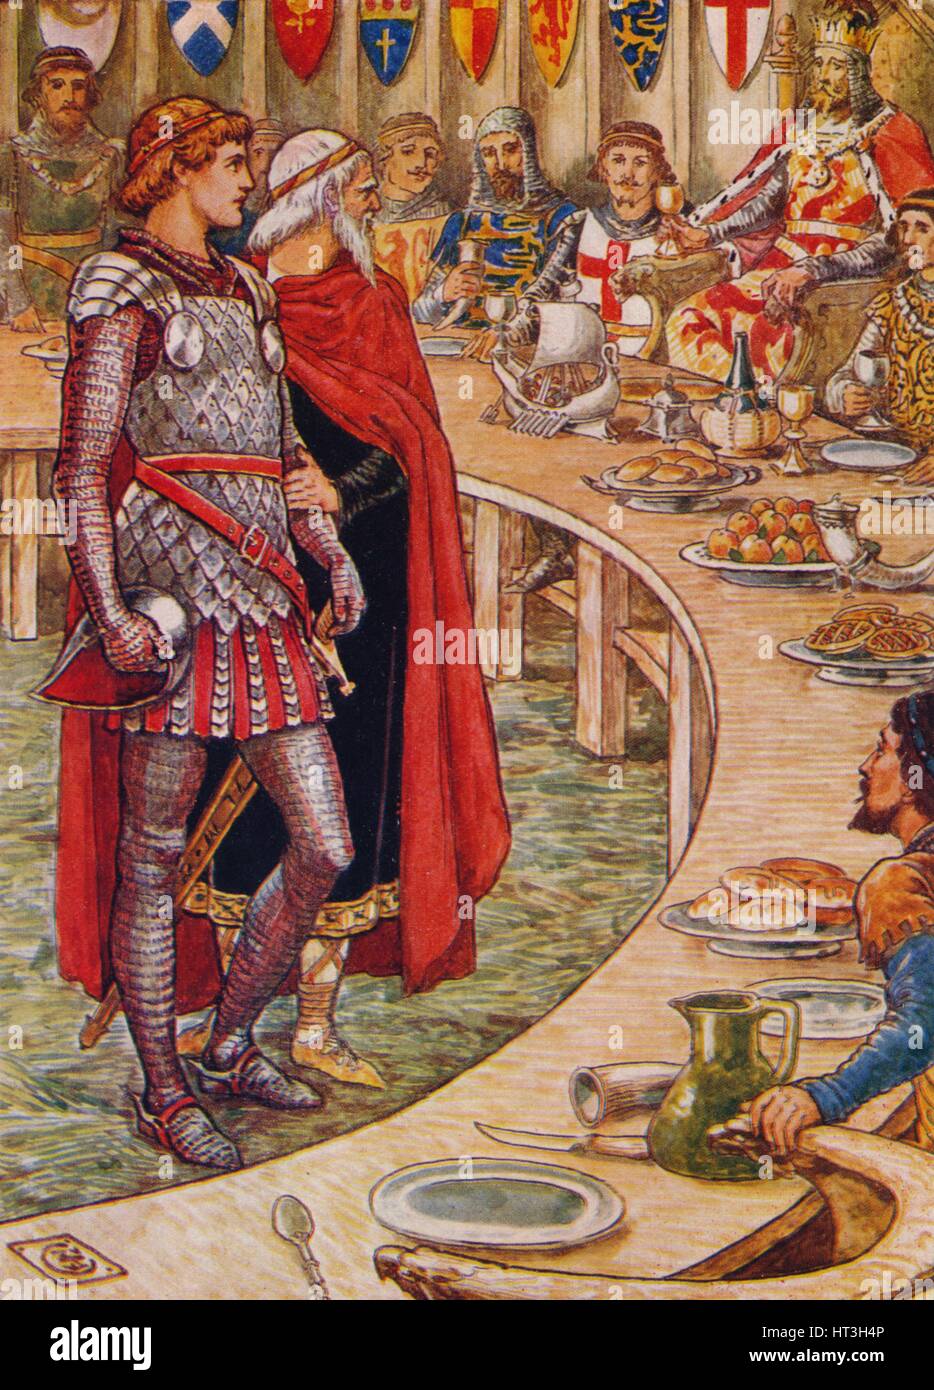 'Sir Galahad is brought to the Court of King Arthur', 1911.  Artist: Walter Crane. Stock Photo